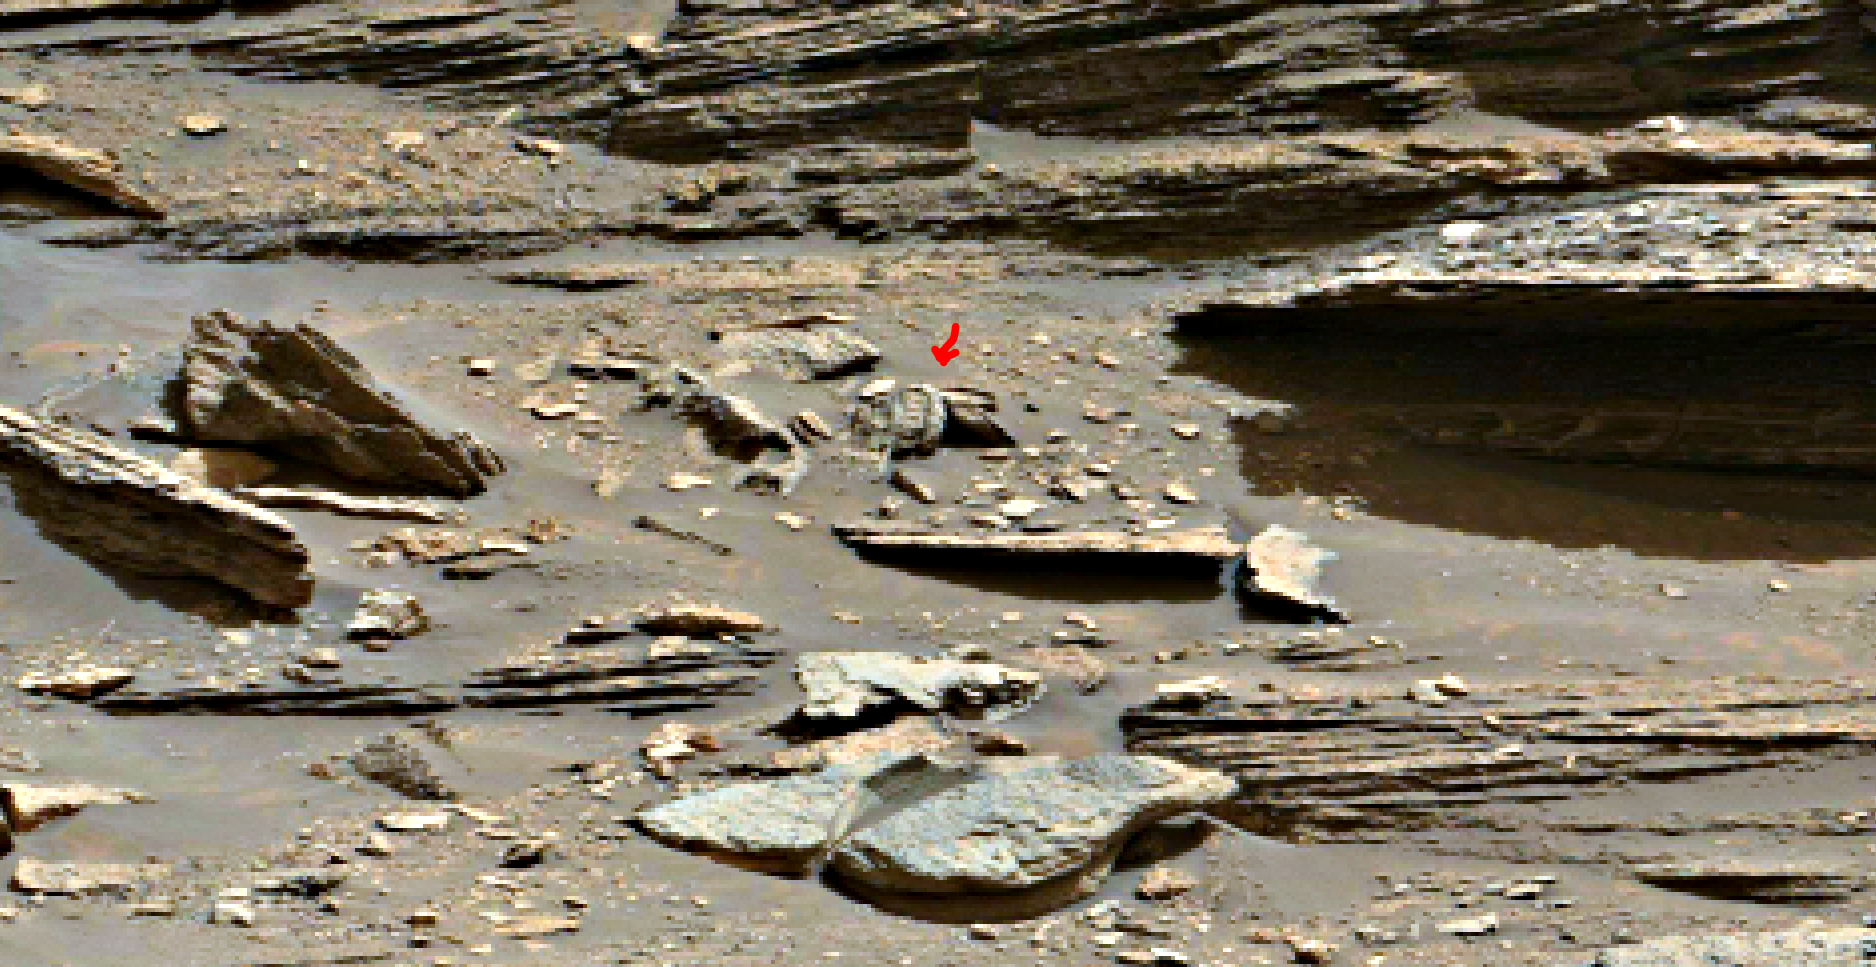 mars-sol-1448-anomaly-artifacts-17-was-life-on-mars